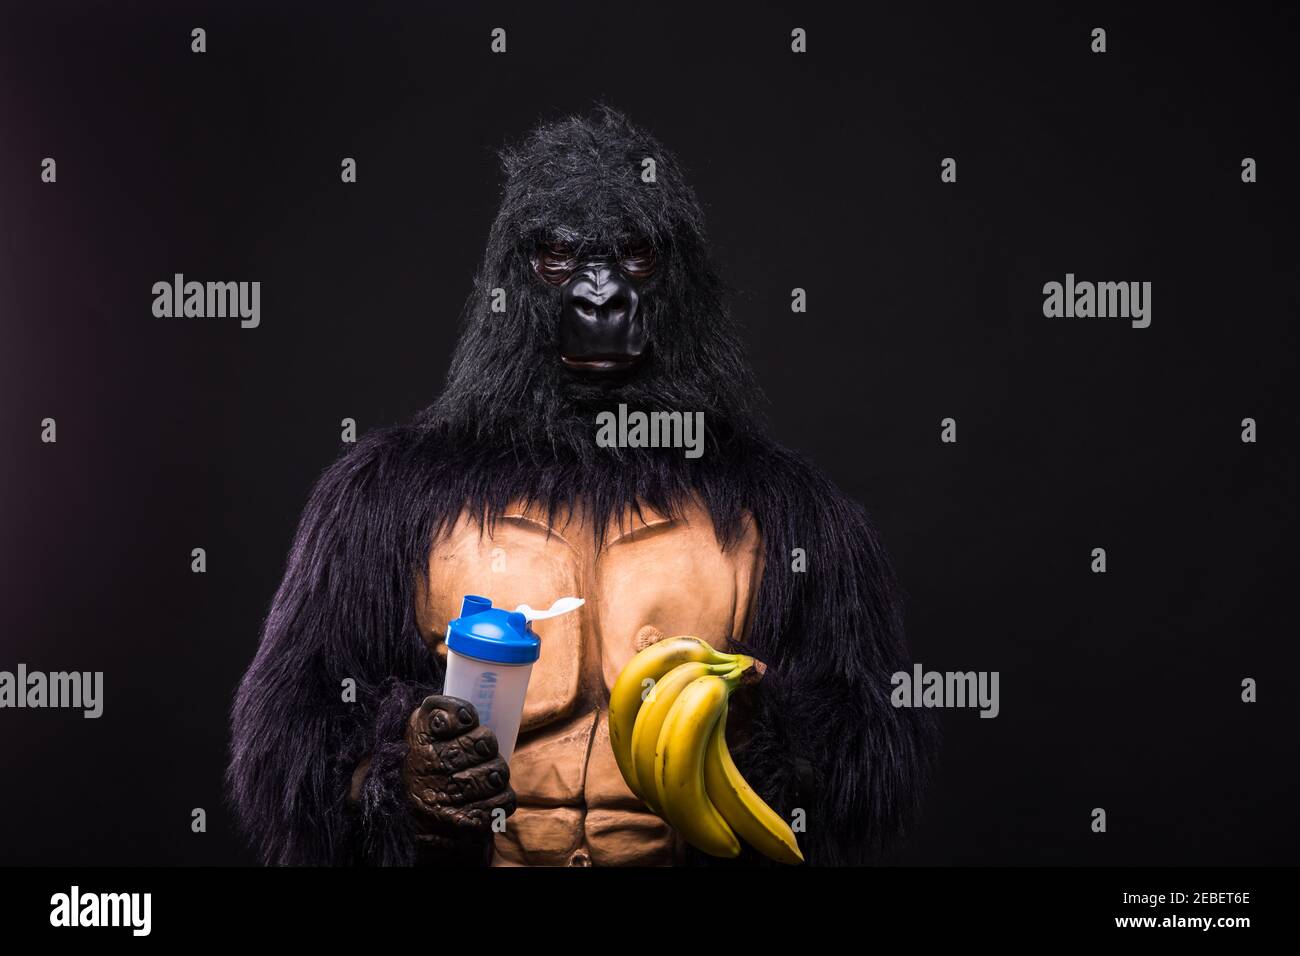 Page 3 - Muscular monkey High Resolution Stock Photography and Images -  Alamy